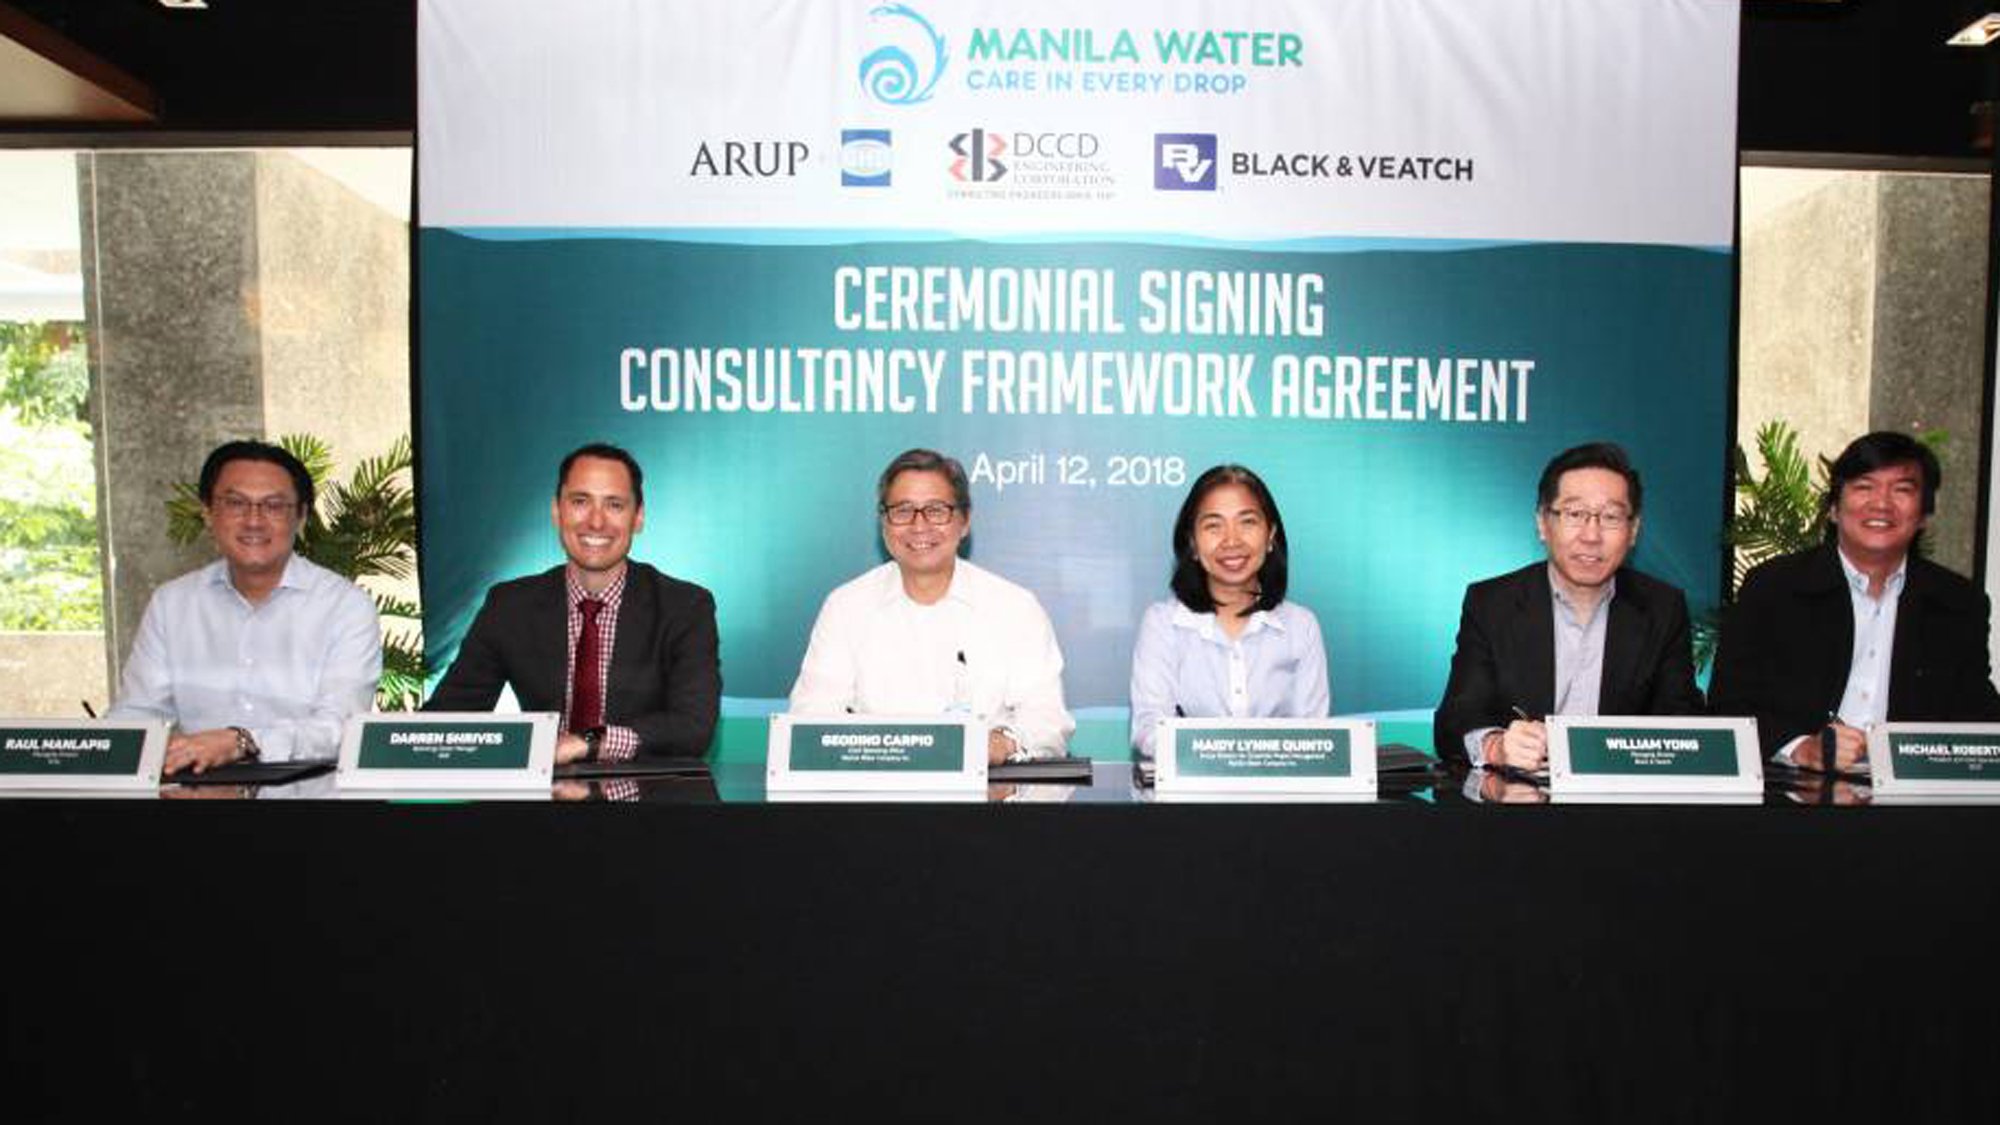 Arup has been appointed for a 5-year framework agreement with Manila Water Company Inc. to develop a series of large water, wastewater treatment and sewerage projects.